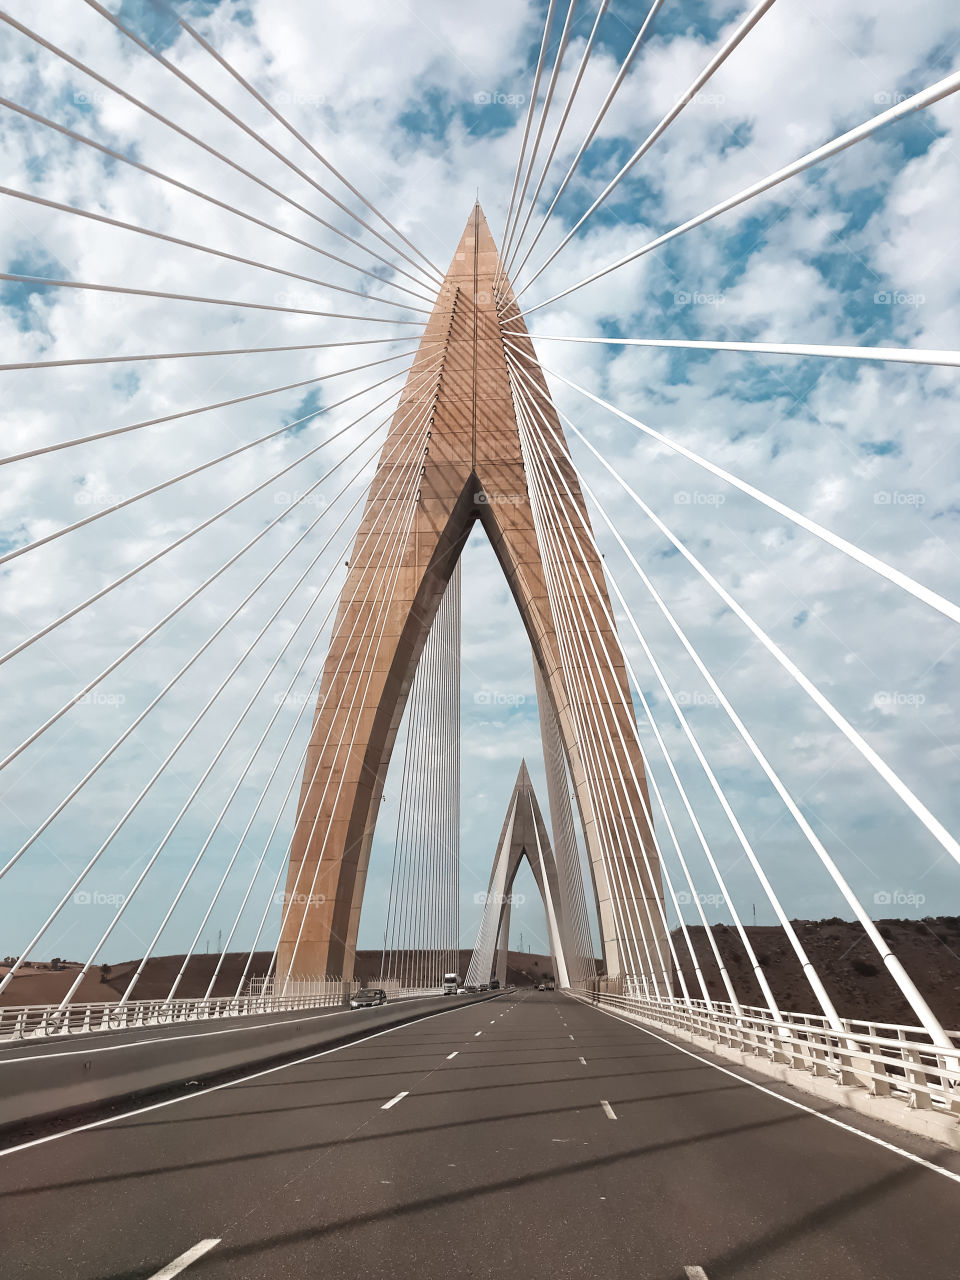 The Mohammed VI Bridge is a cable-stayed bridge that spans the valley of the Bouregreg River near Rabat in Morocco.